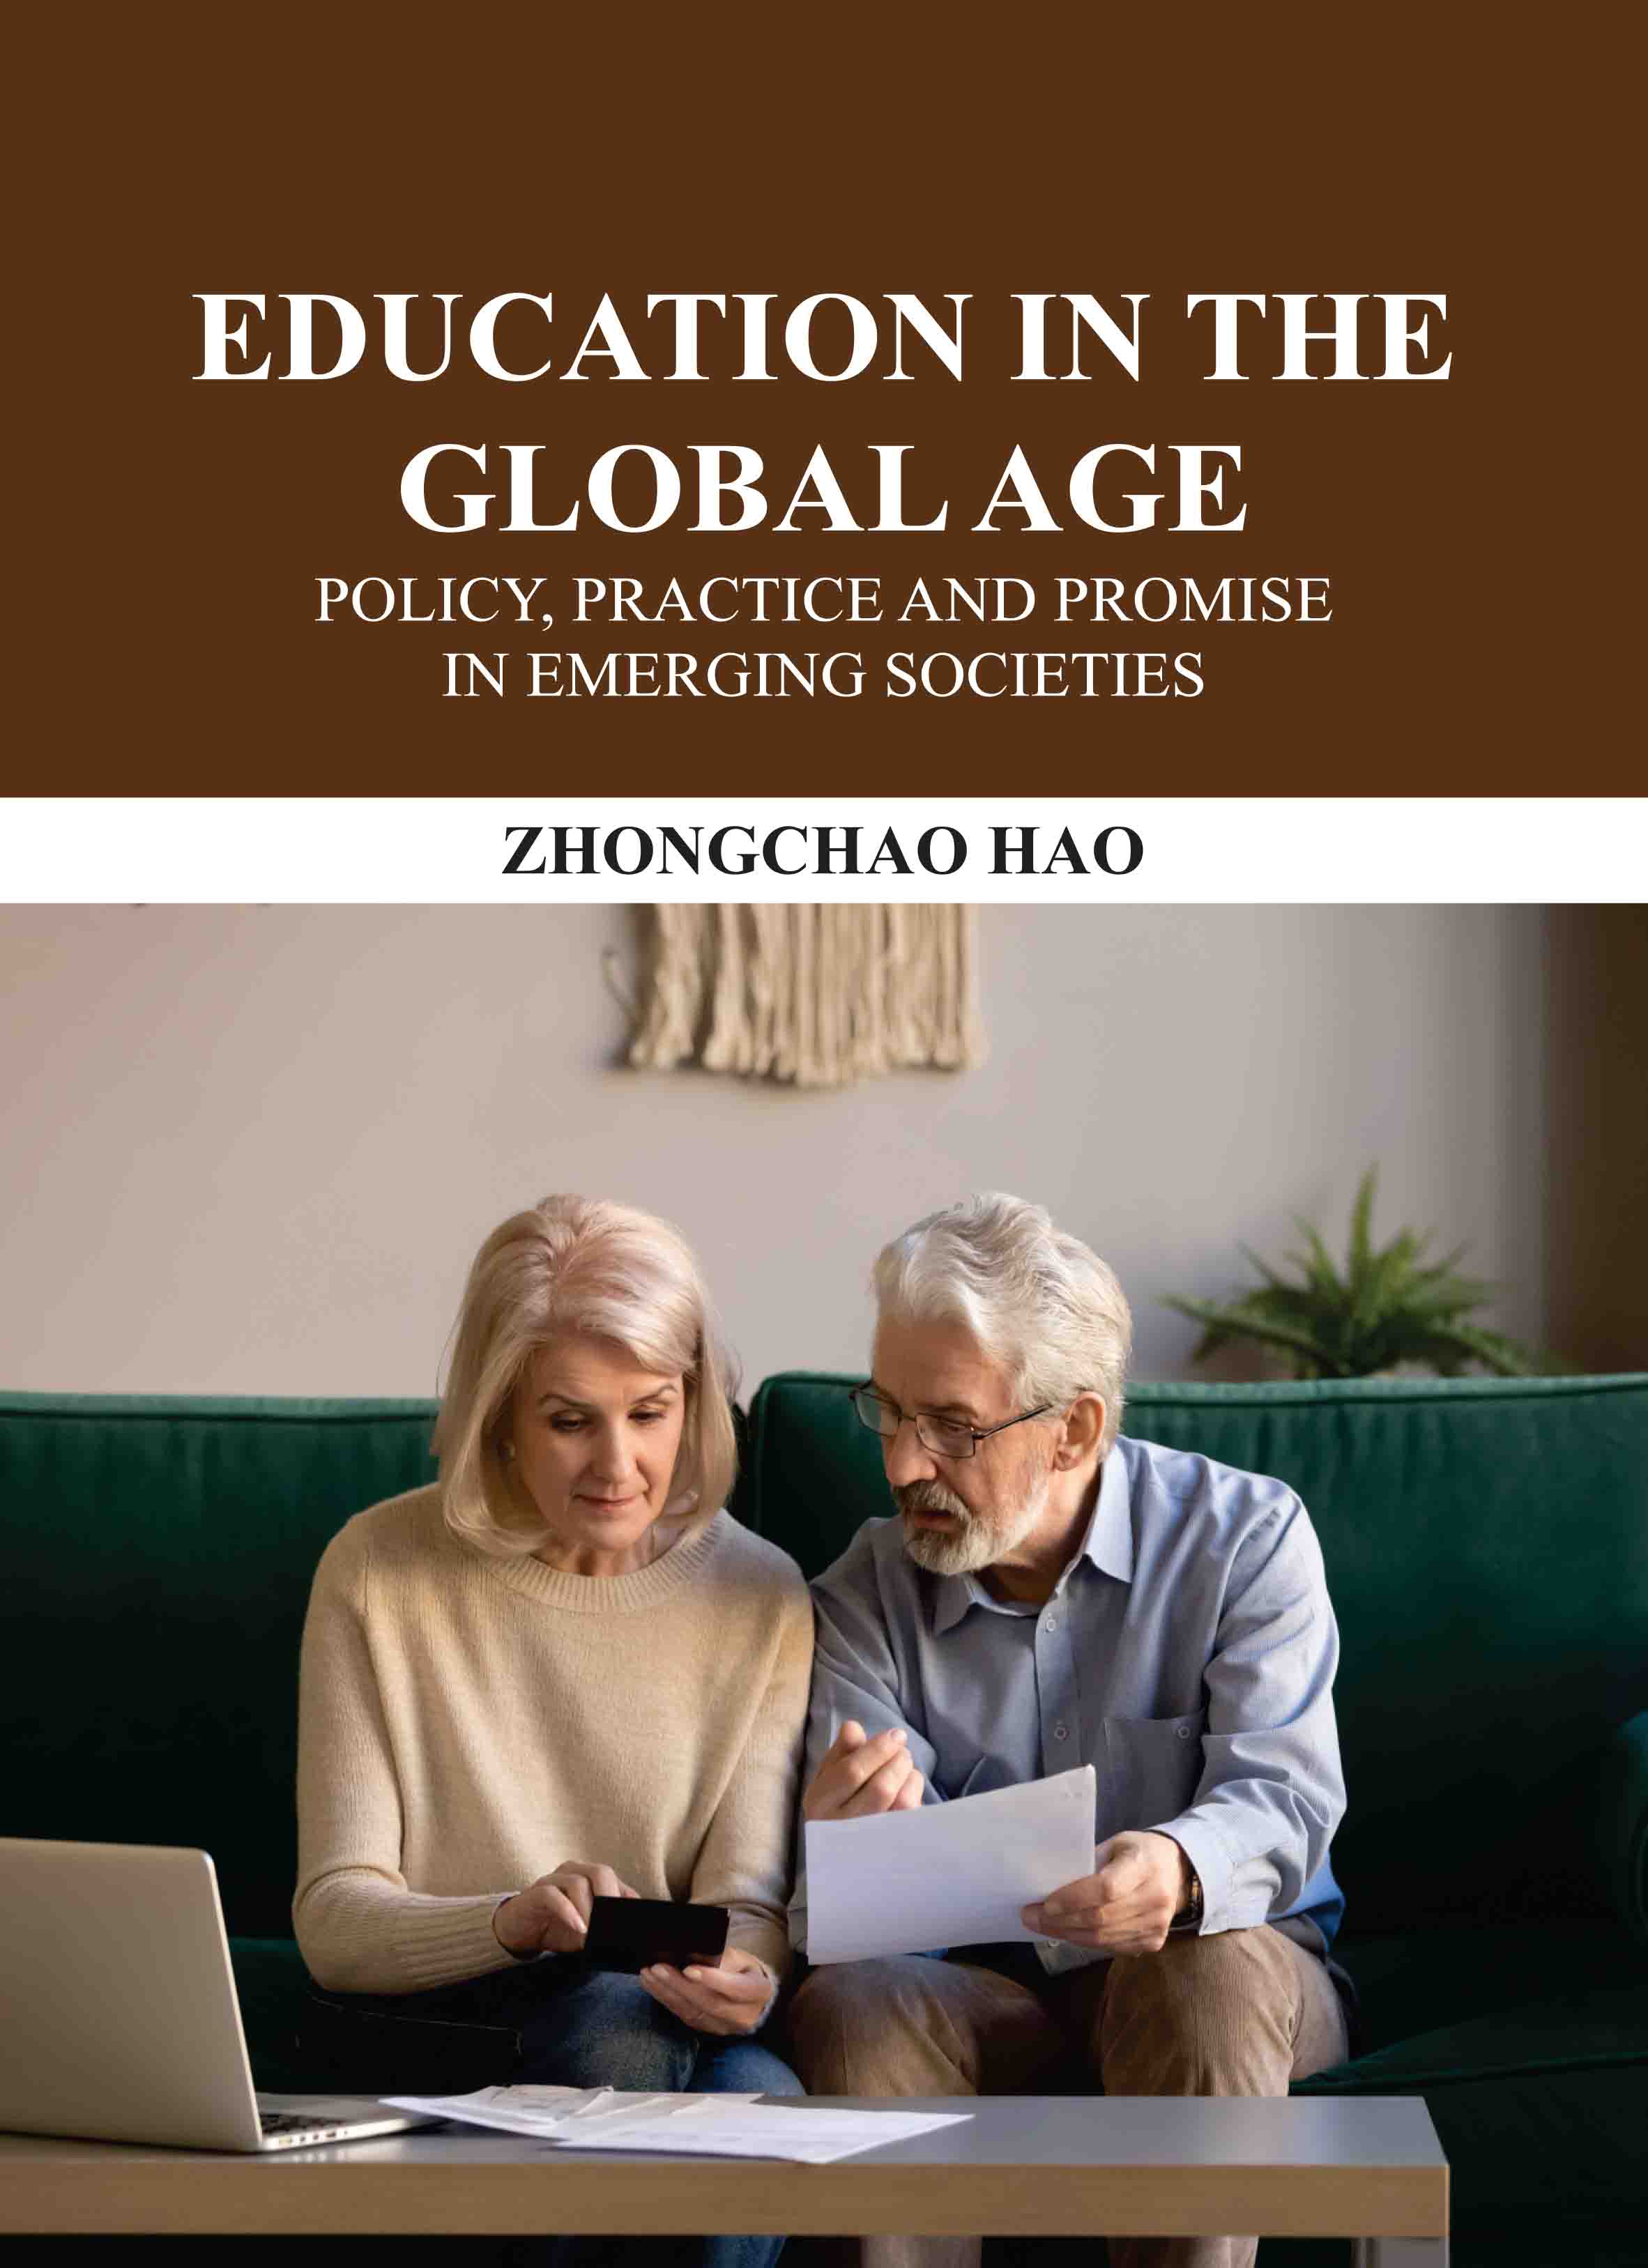 Education in the Global Age: Policy, Practice and Promise in Emerging Societies